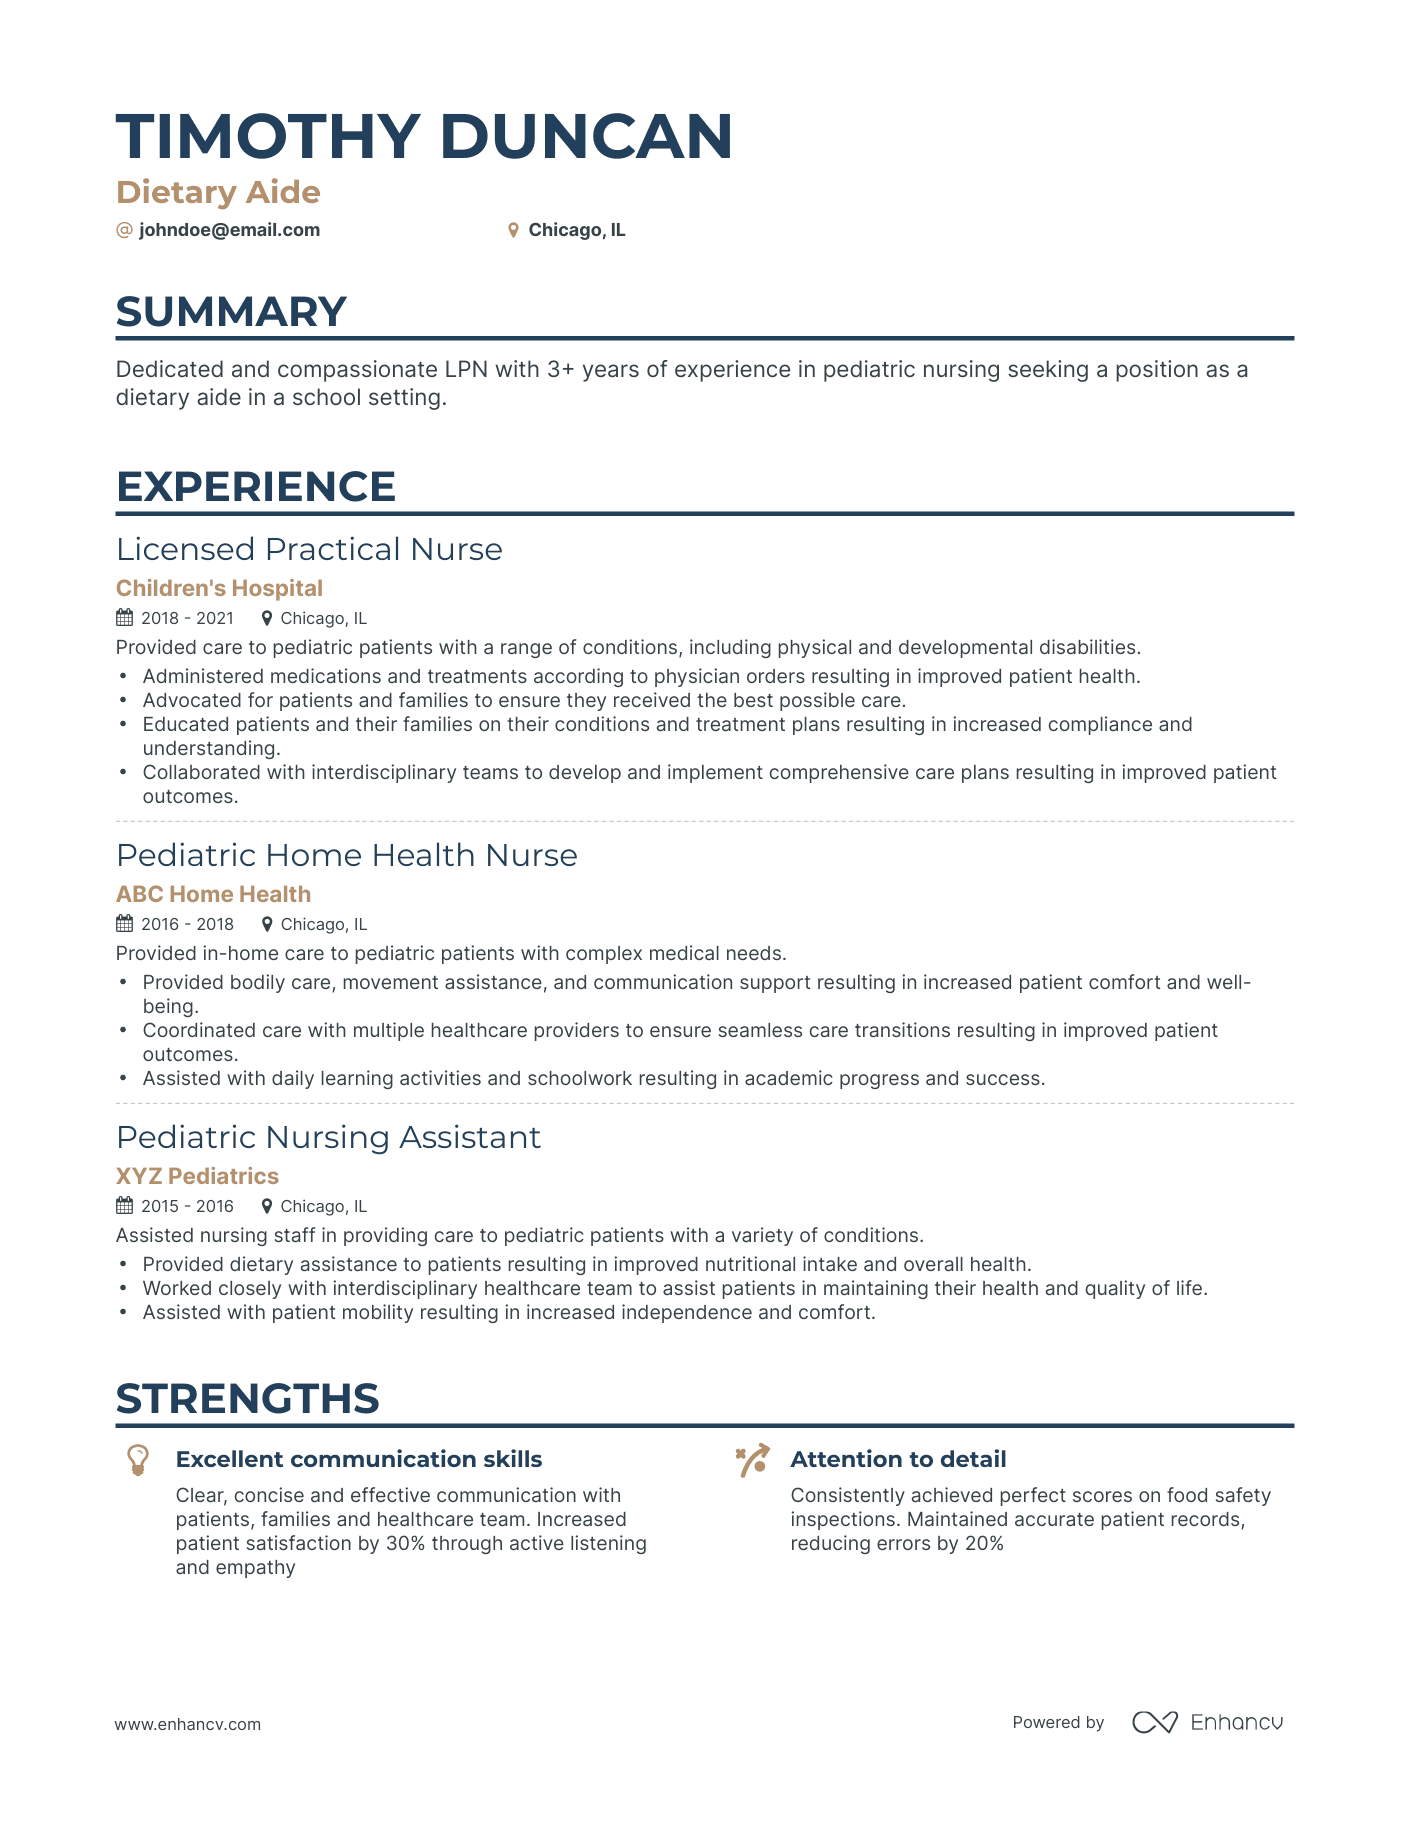 Classic Dietary Aide Resume Template